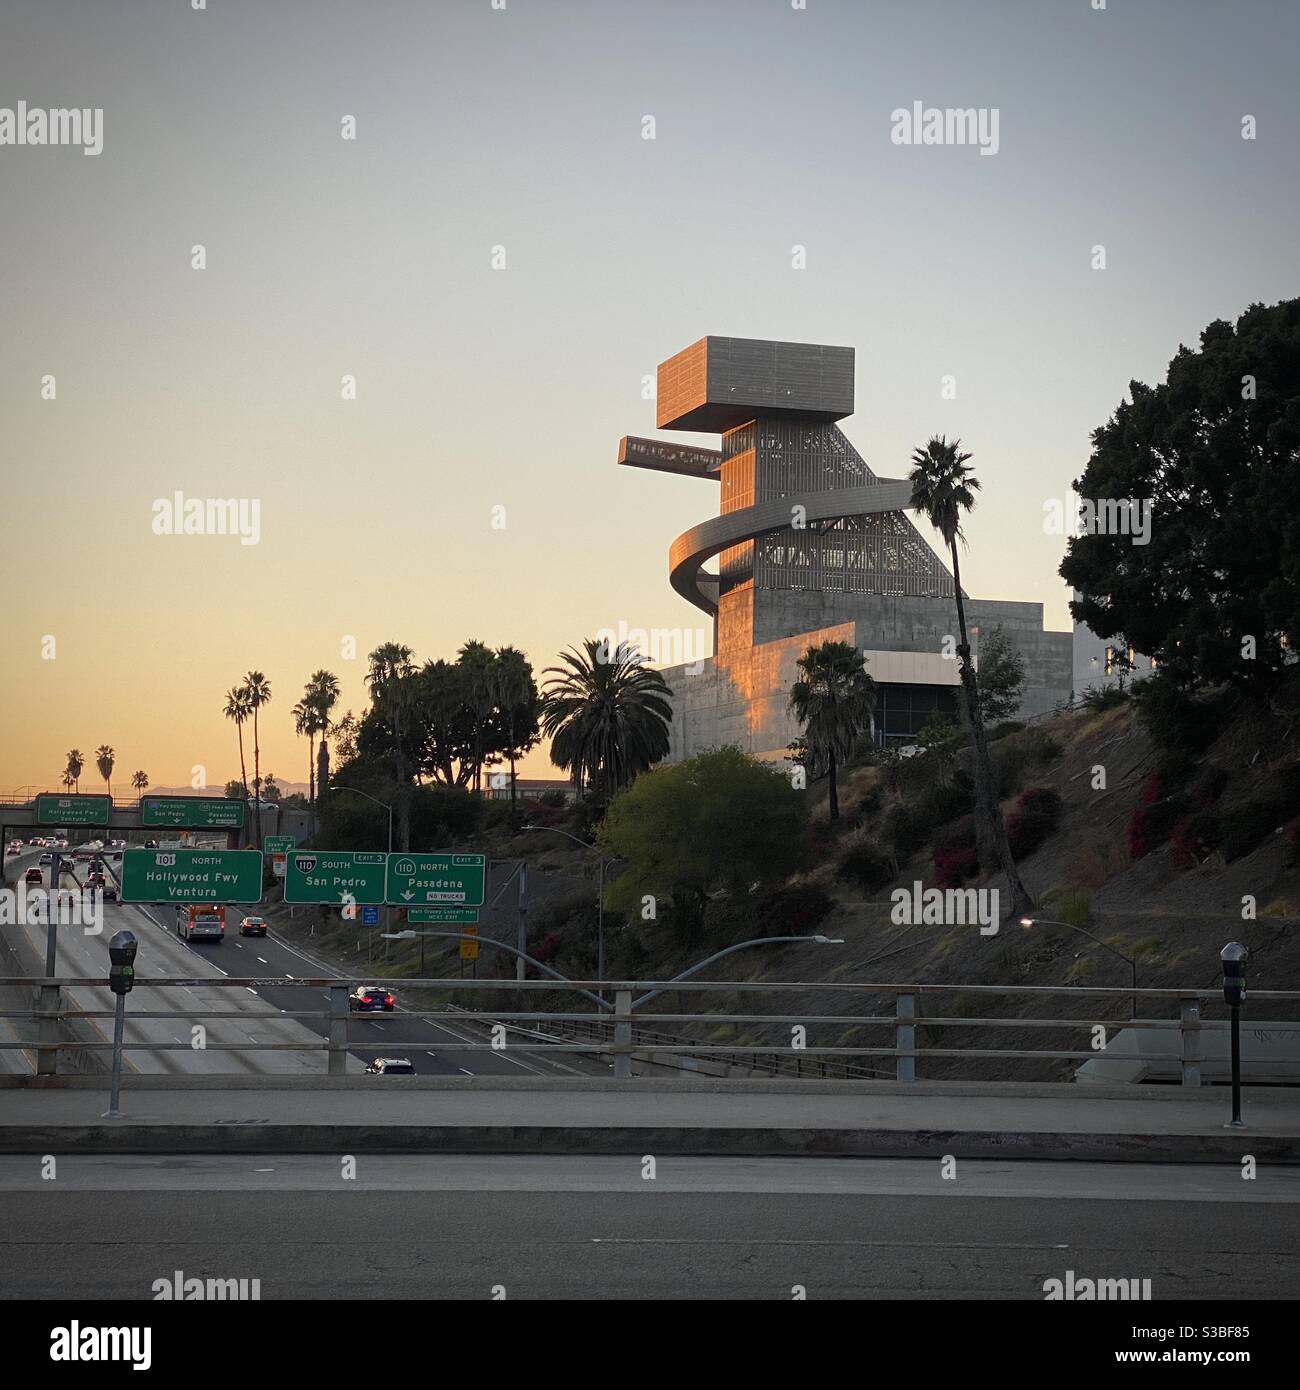 LOS ANGELES, CA, AUG 2020: interesting building at Ramon C Cortines School of Visual Arts and Performing Arts next to the CA-101 and US-110 freeway interchange in Downtown, at sunset Stock Photo